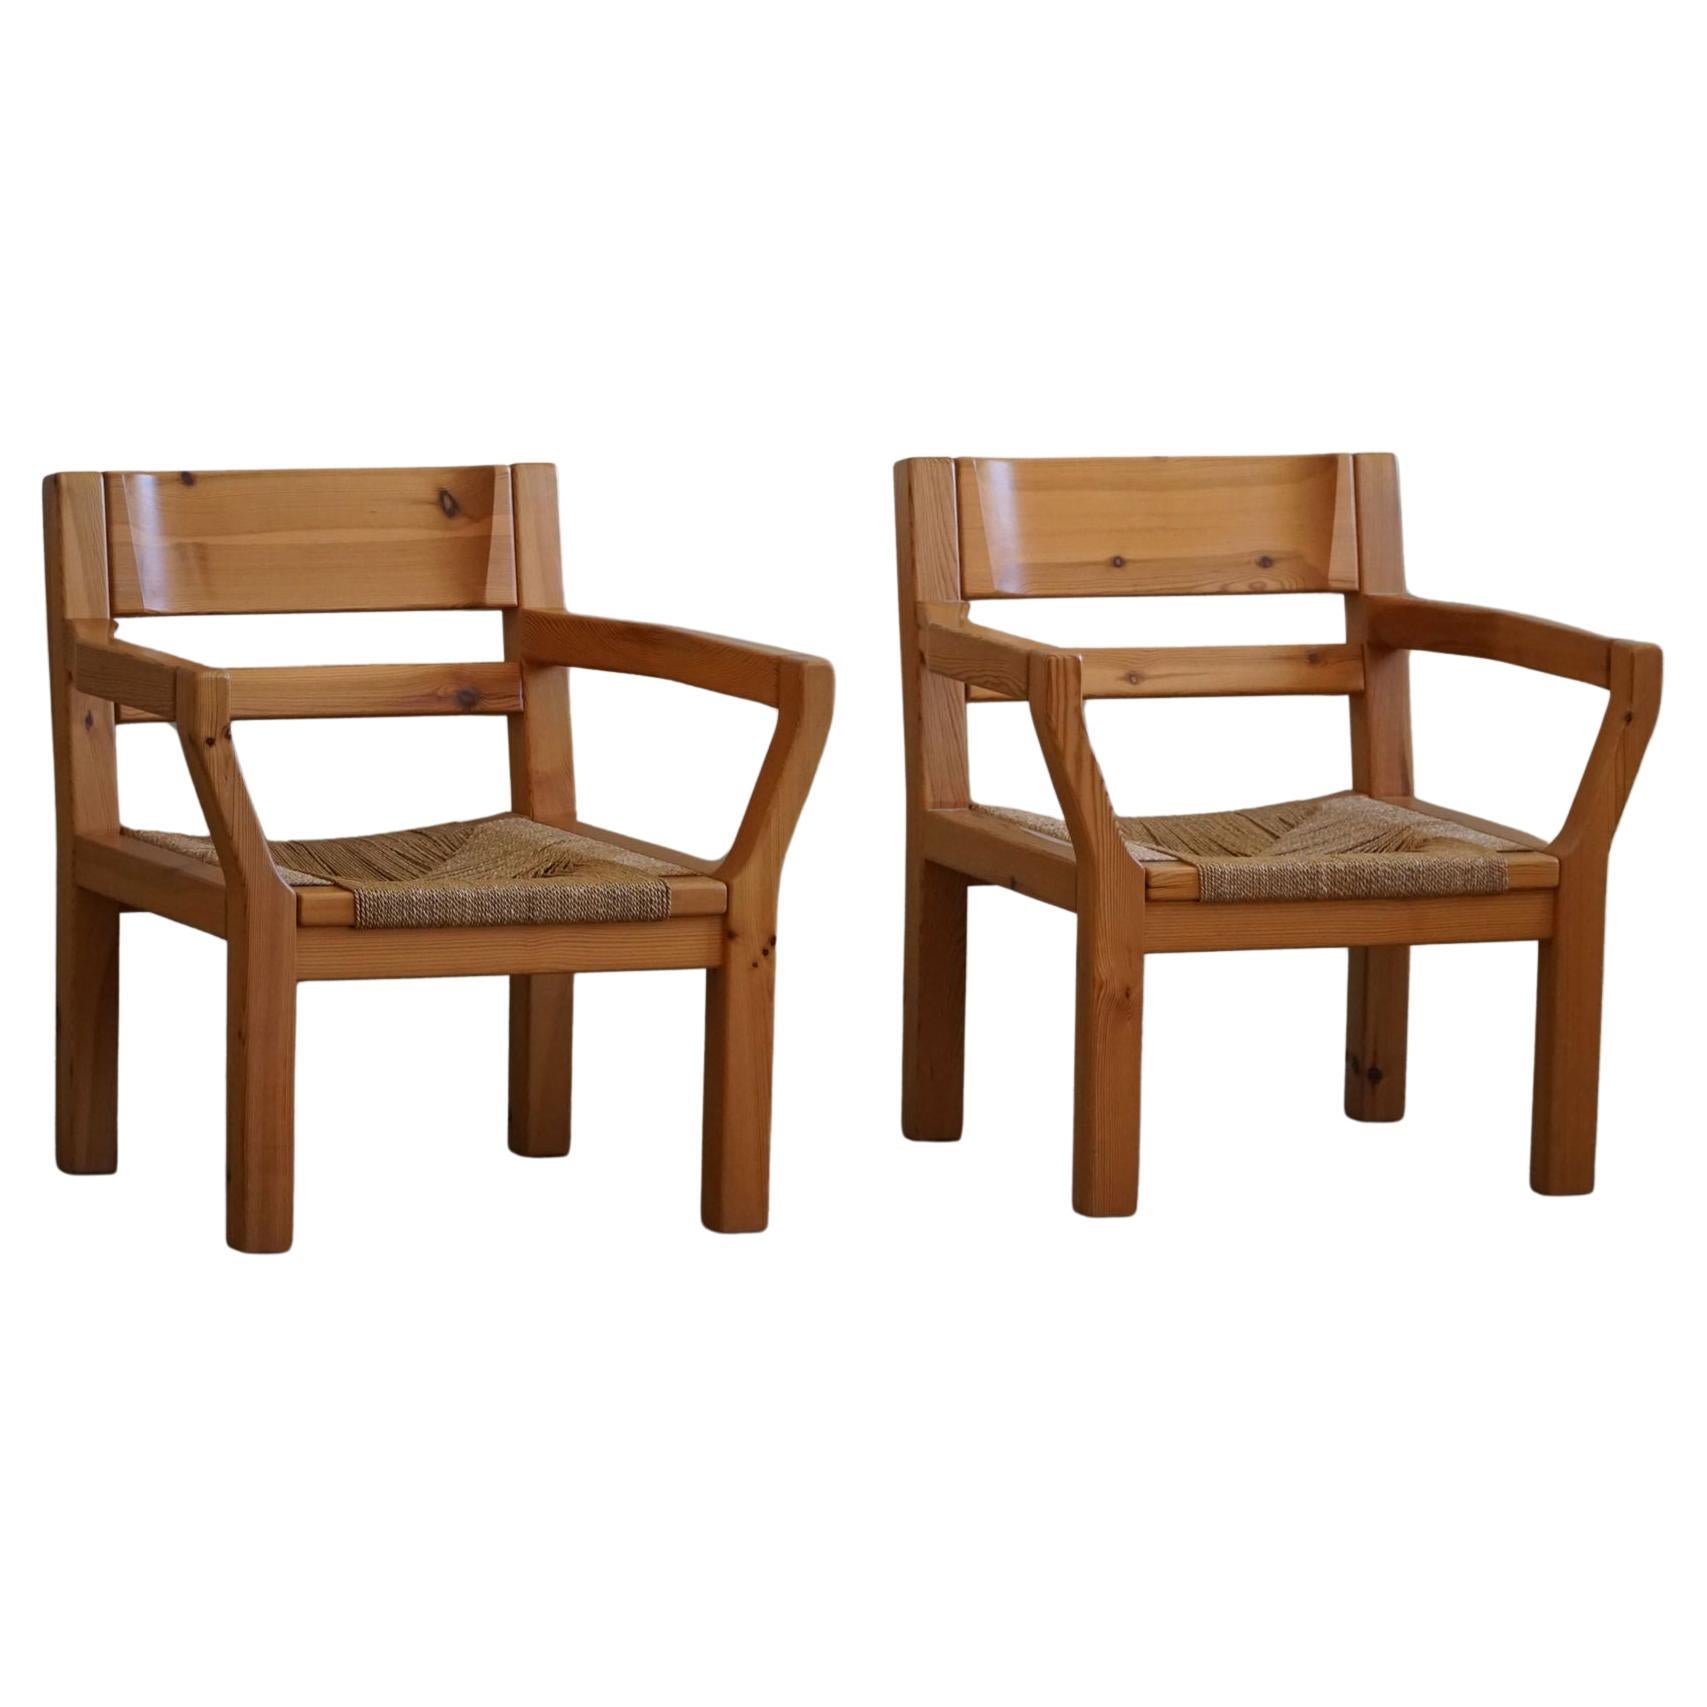 Tage Poulsen, A Pair of Brutalist Chairs in Pine & Cord, Danish Modern, 1970s For Sale